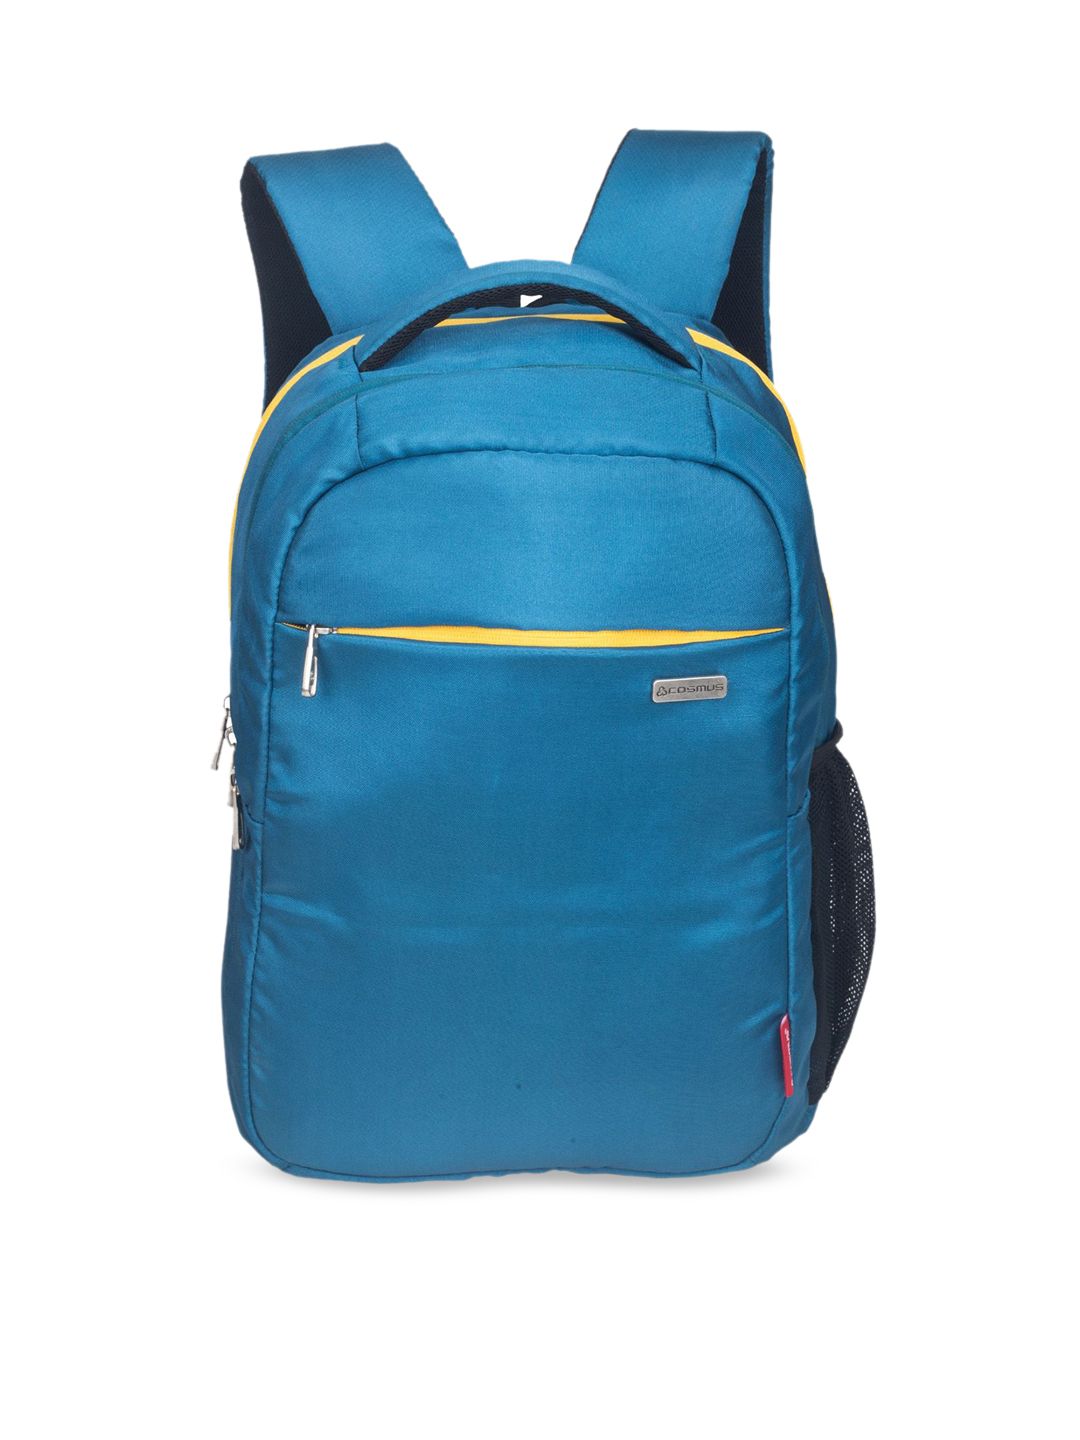 COSMUS Unisex Blue Solid Laptop Backpack Price in India